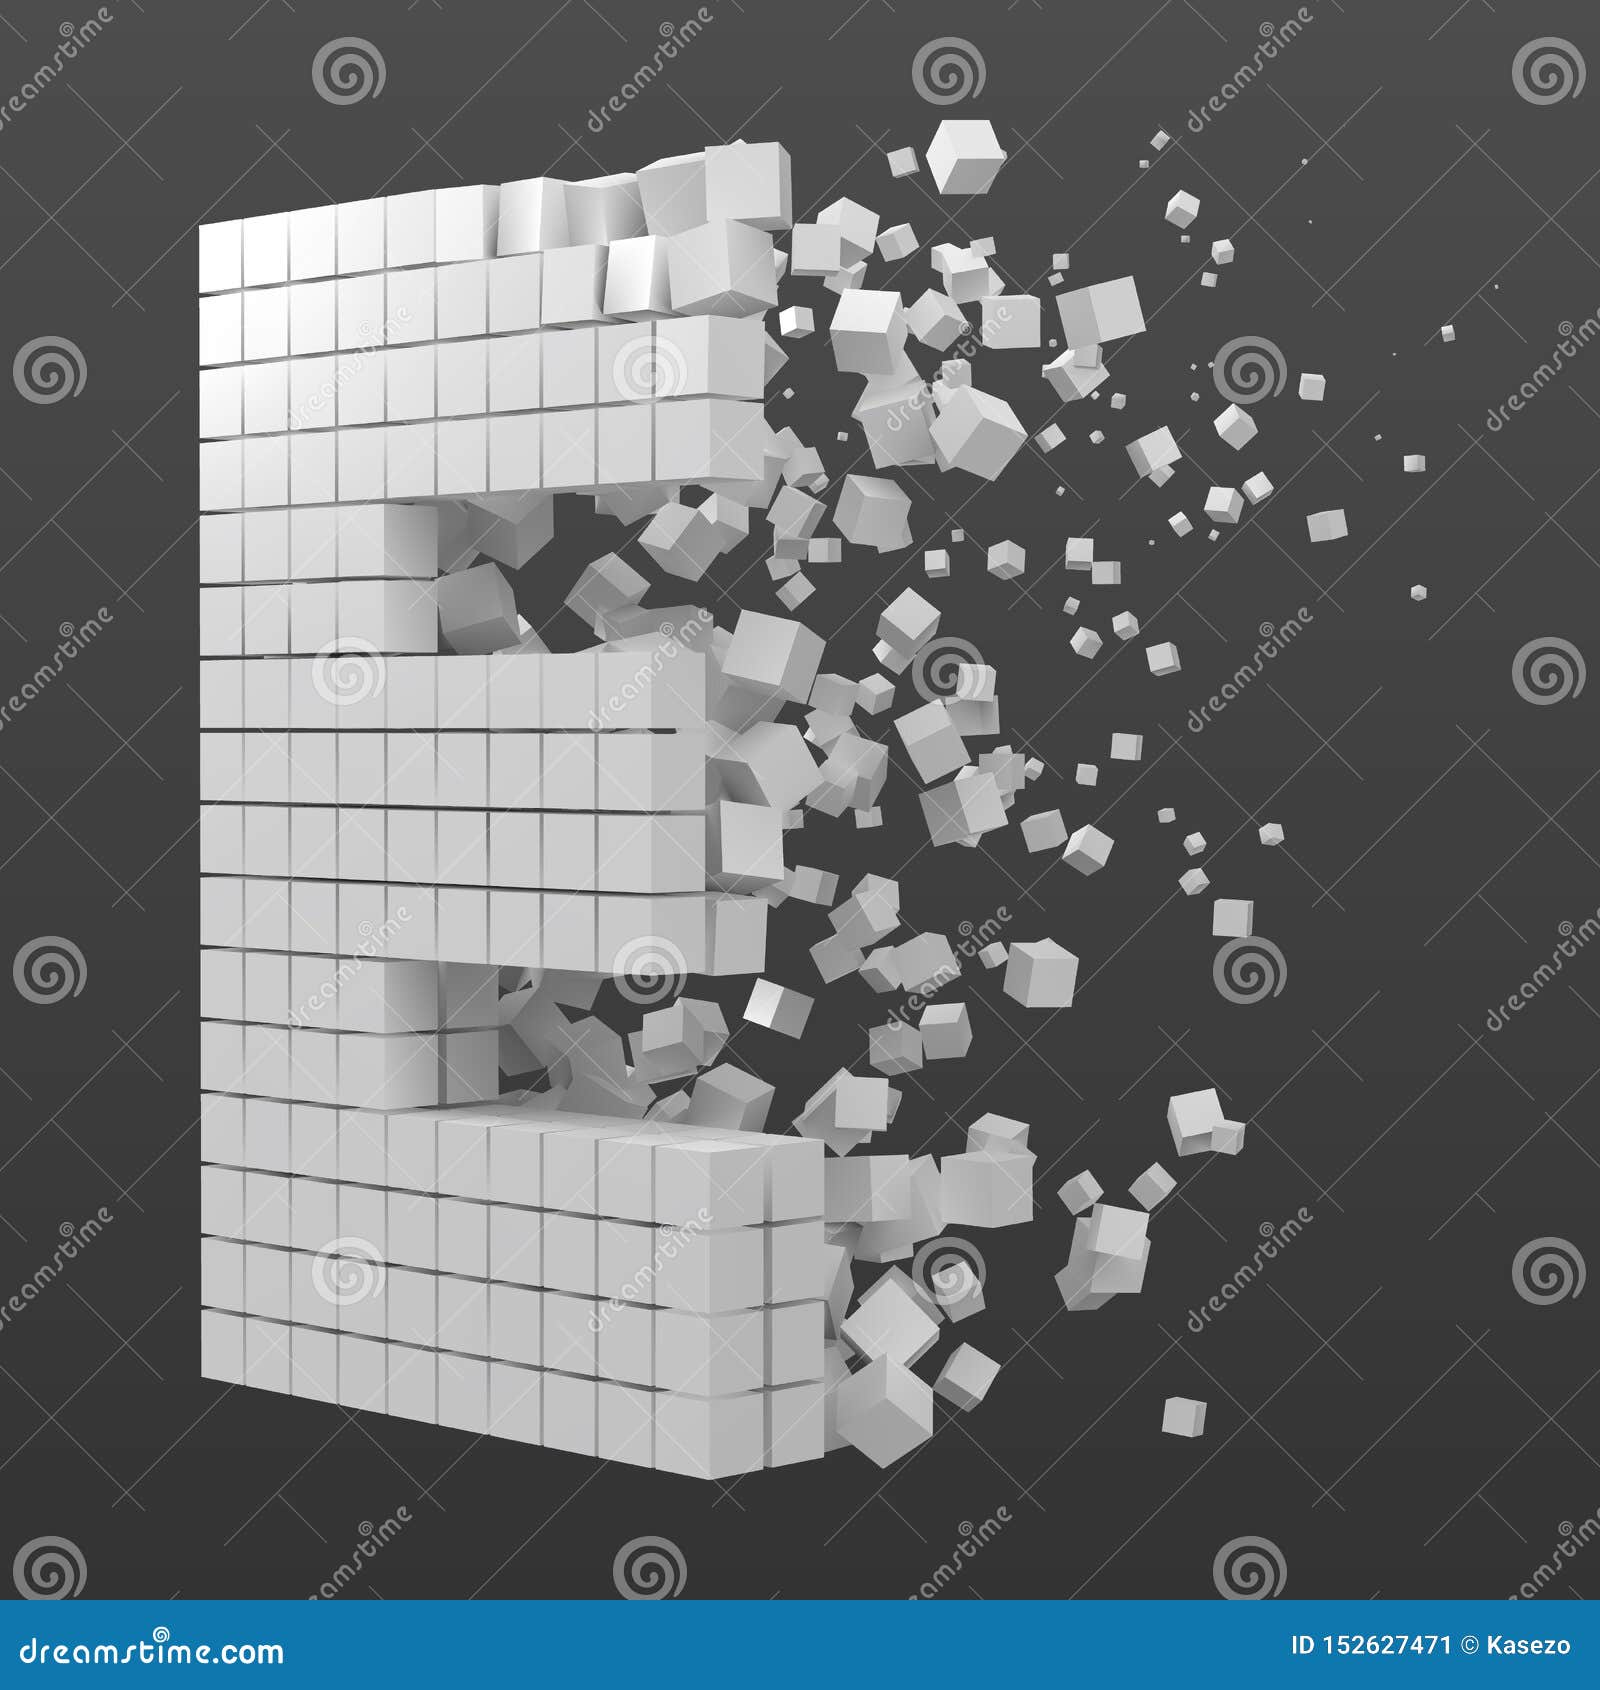 Letter E Shaped Data Block Version With White Cubes 3d Pixel Style Vector Illustration Stock Vector Illustration Of Game Isolated